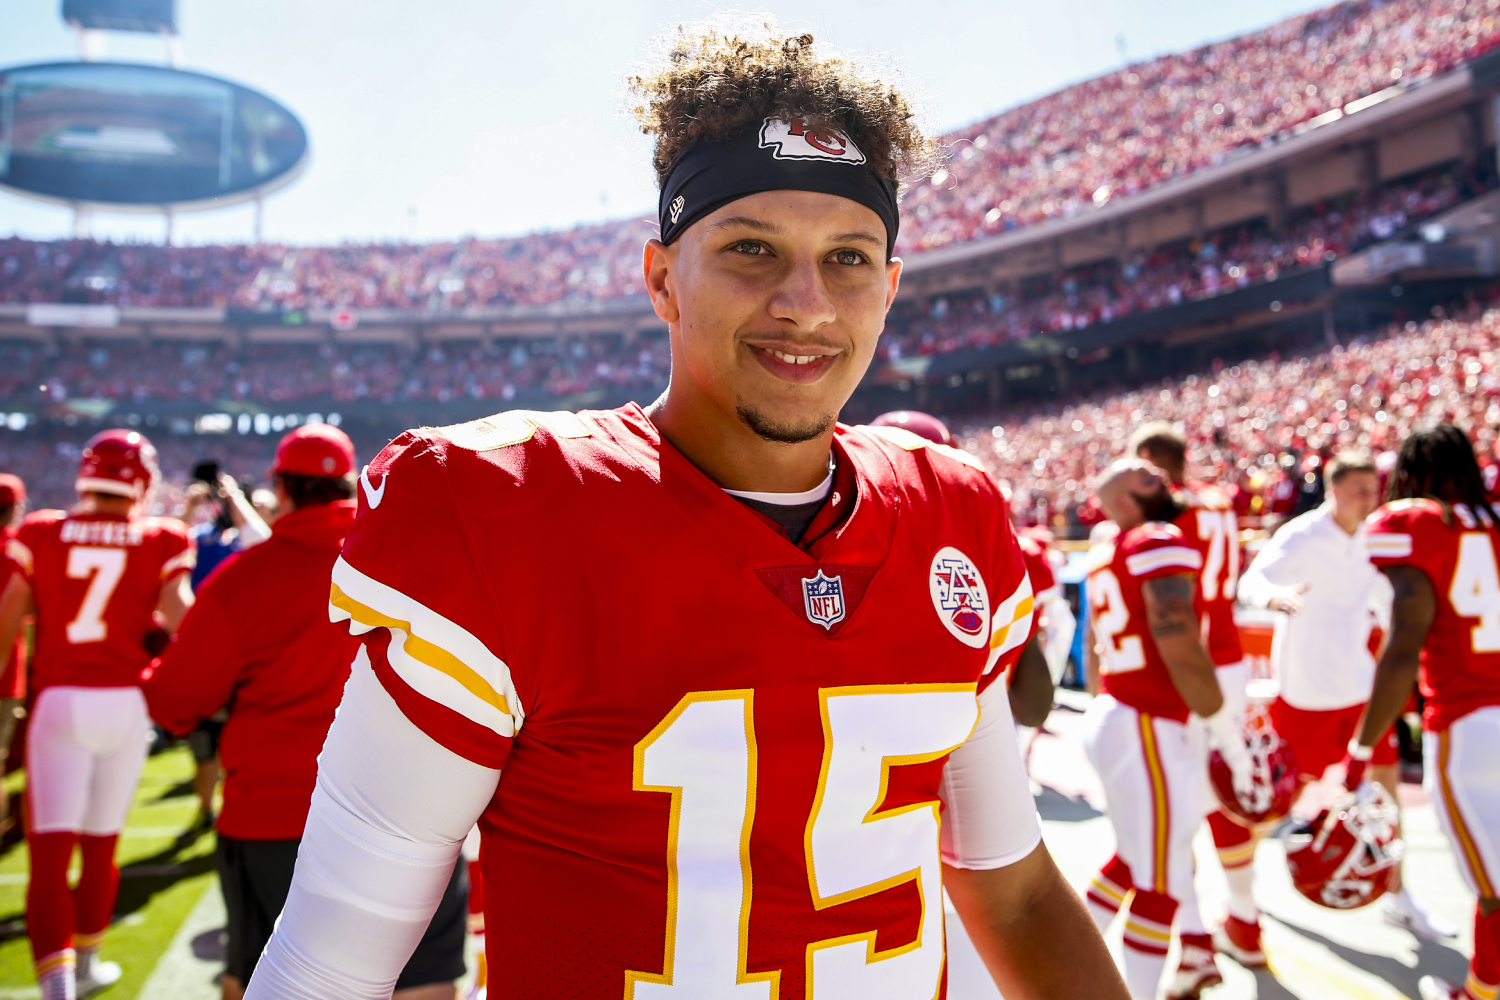 Patrick Mahomes' new massive deal with the Kansas City Chiefs has gotten a lot of reactions, including a big one from O.J. Simpson.